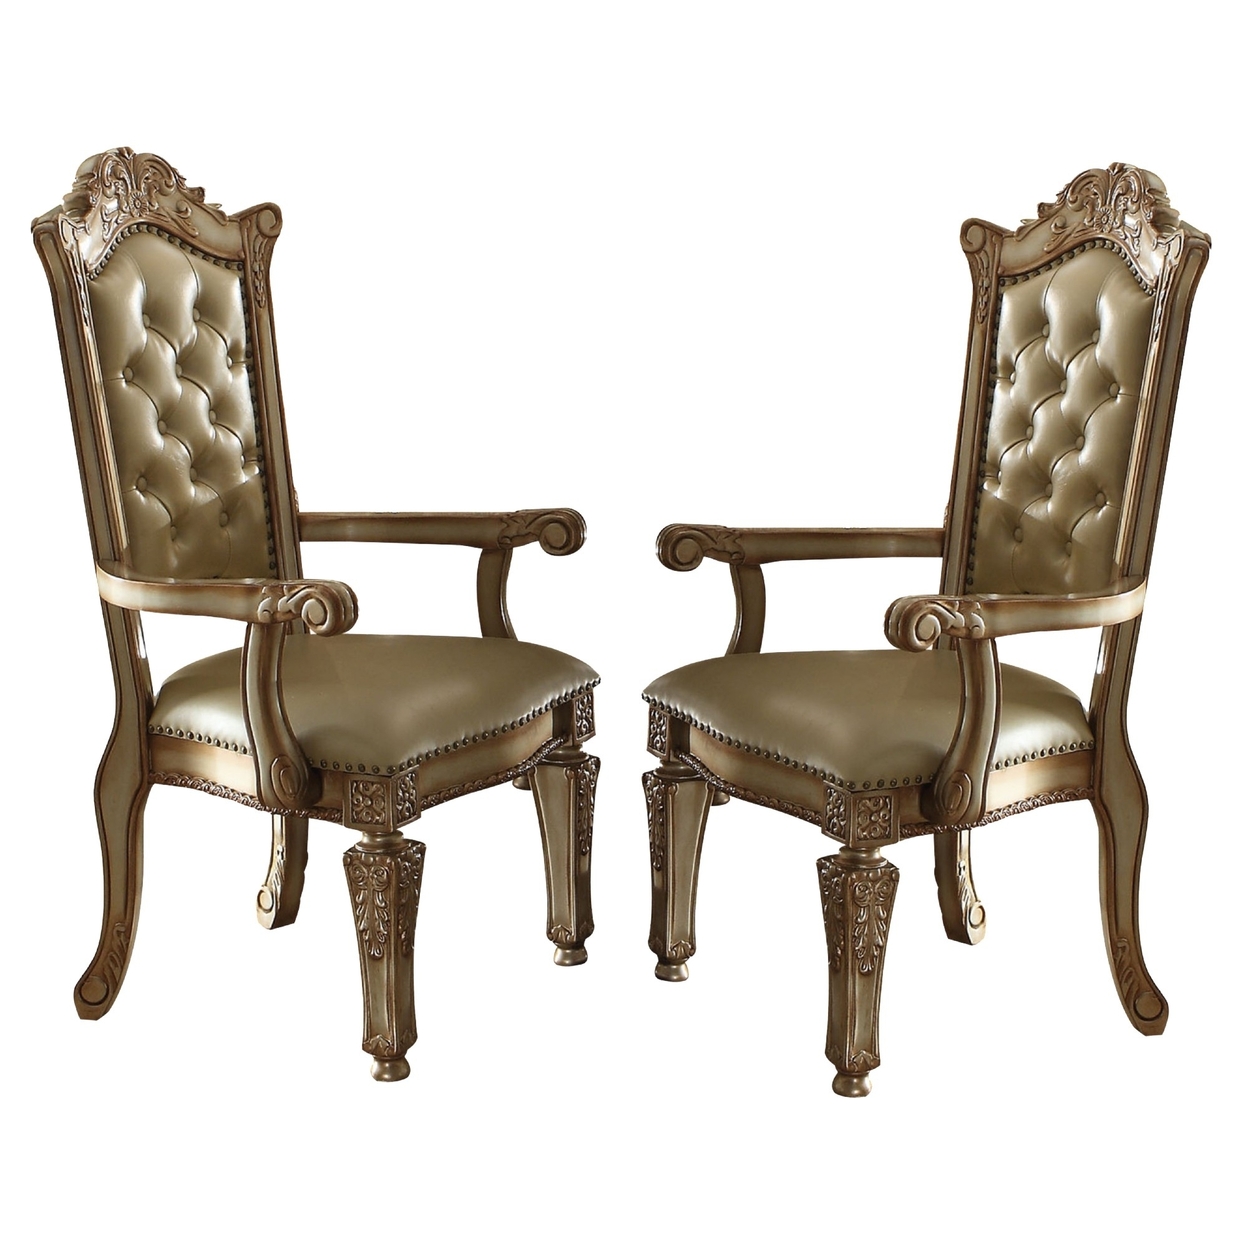 Leatherette Wooden Arm Chair With Button Tufted Details, Set Of 2, Gold- Saltoro Sherpi